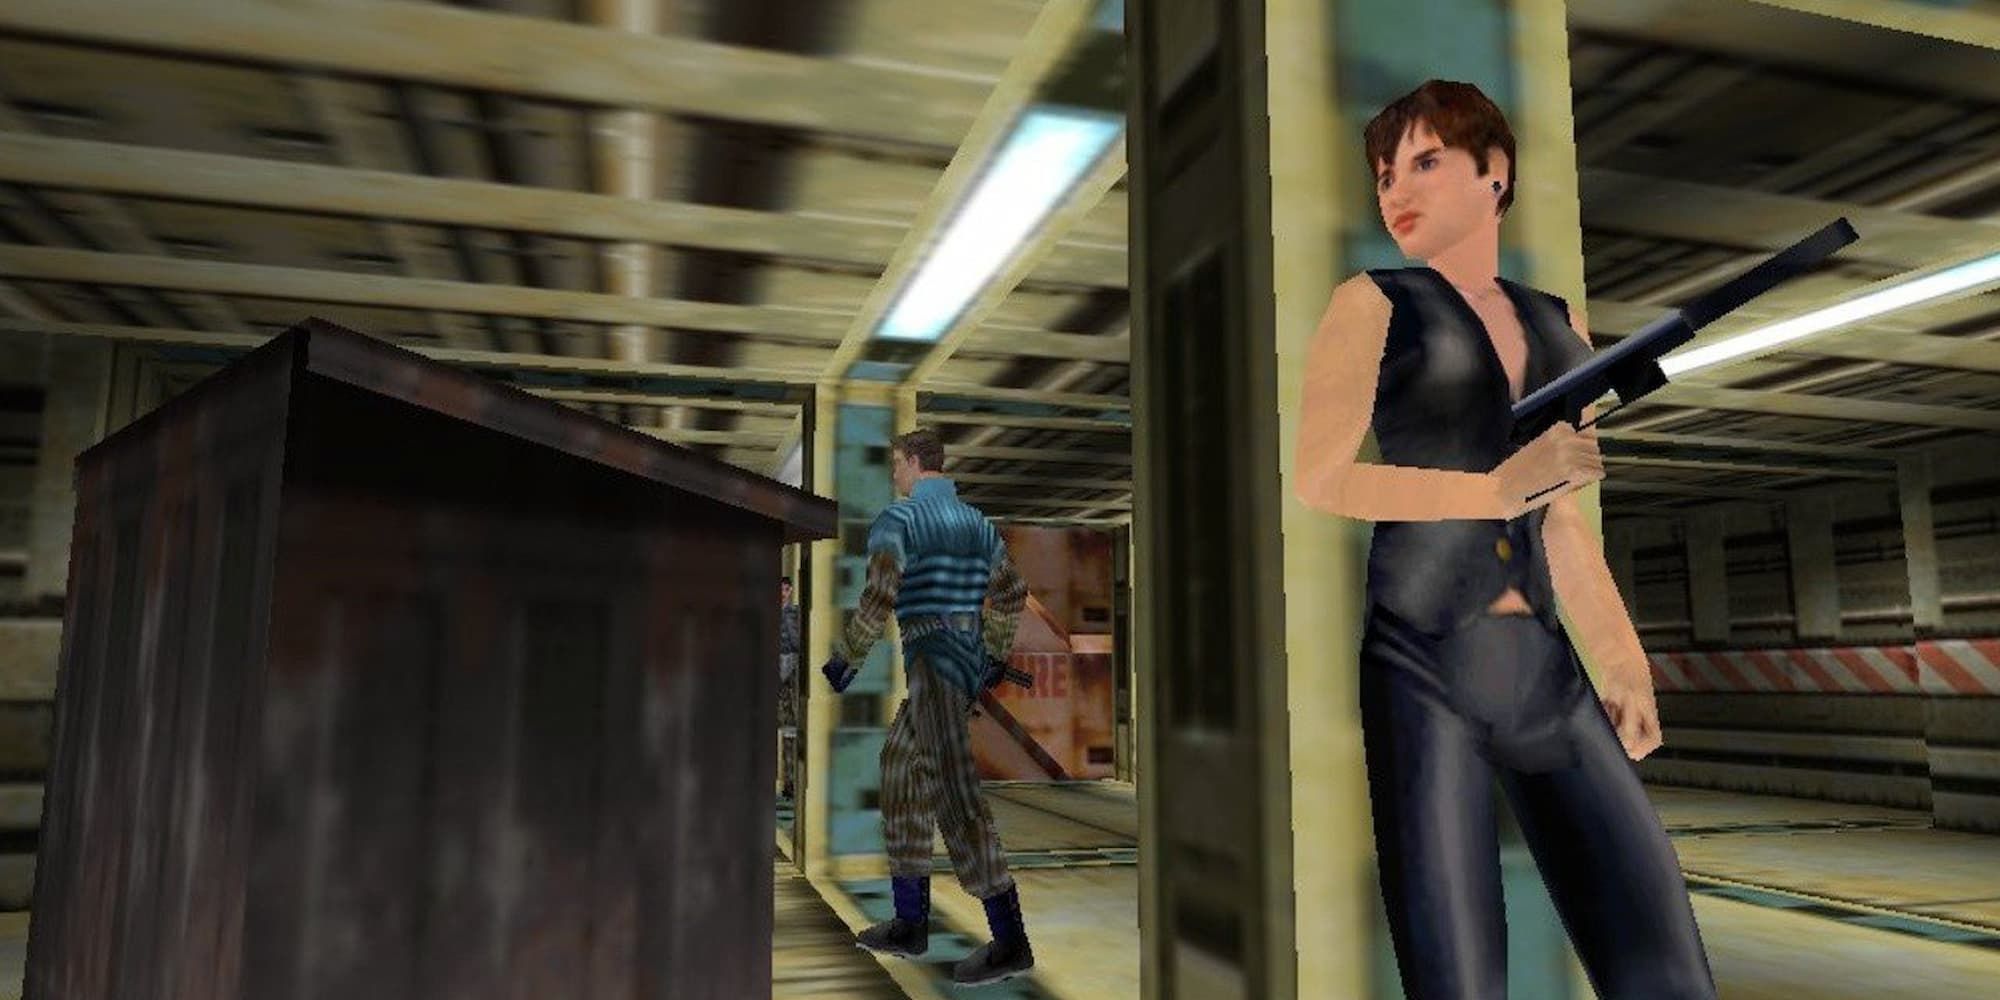 Joanna of Perfect Dark hides behind a pillar as she waits for an enemy to pass.